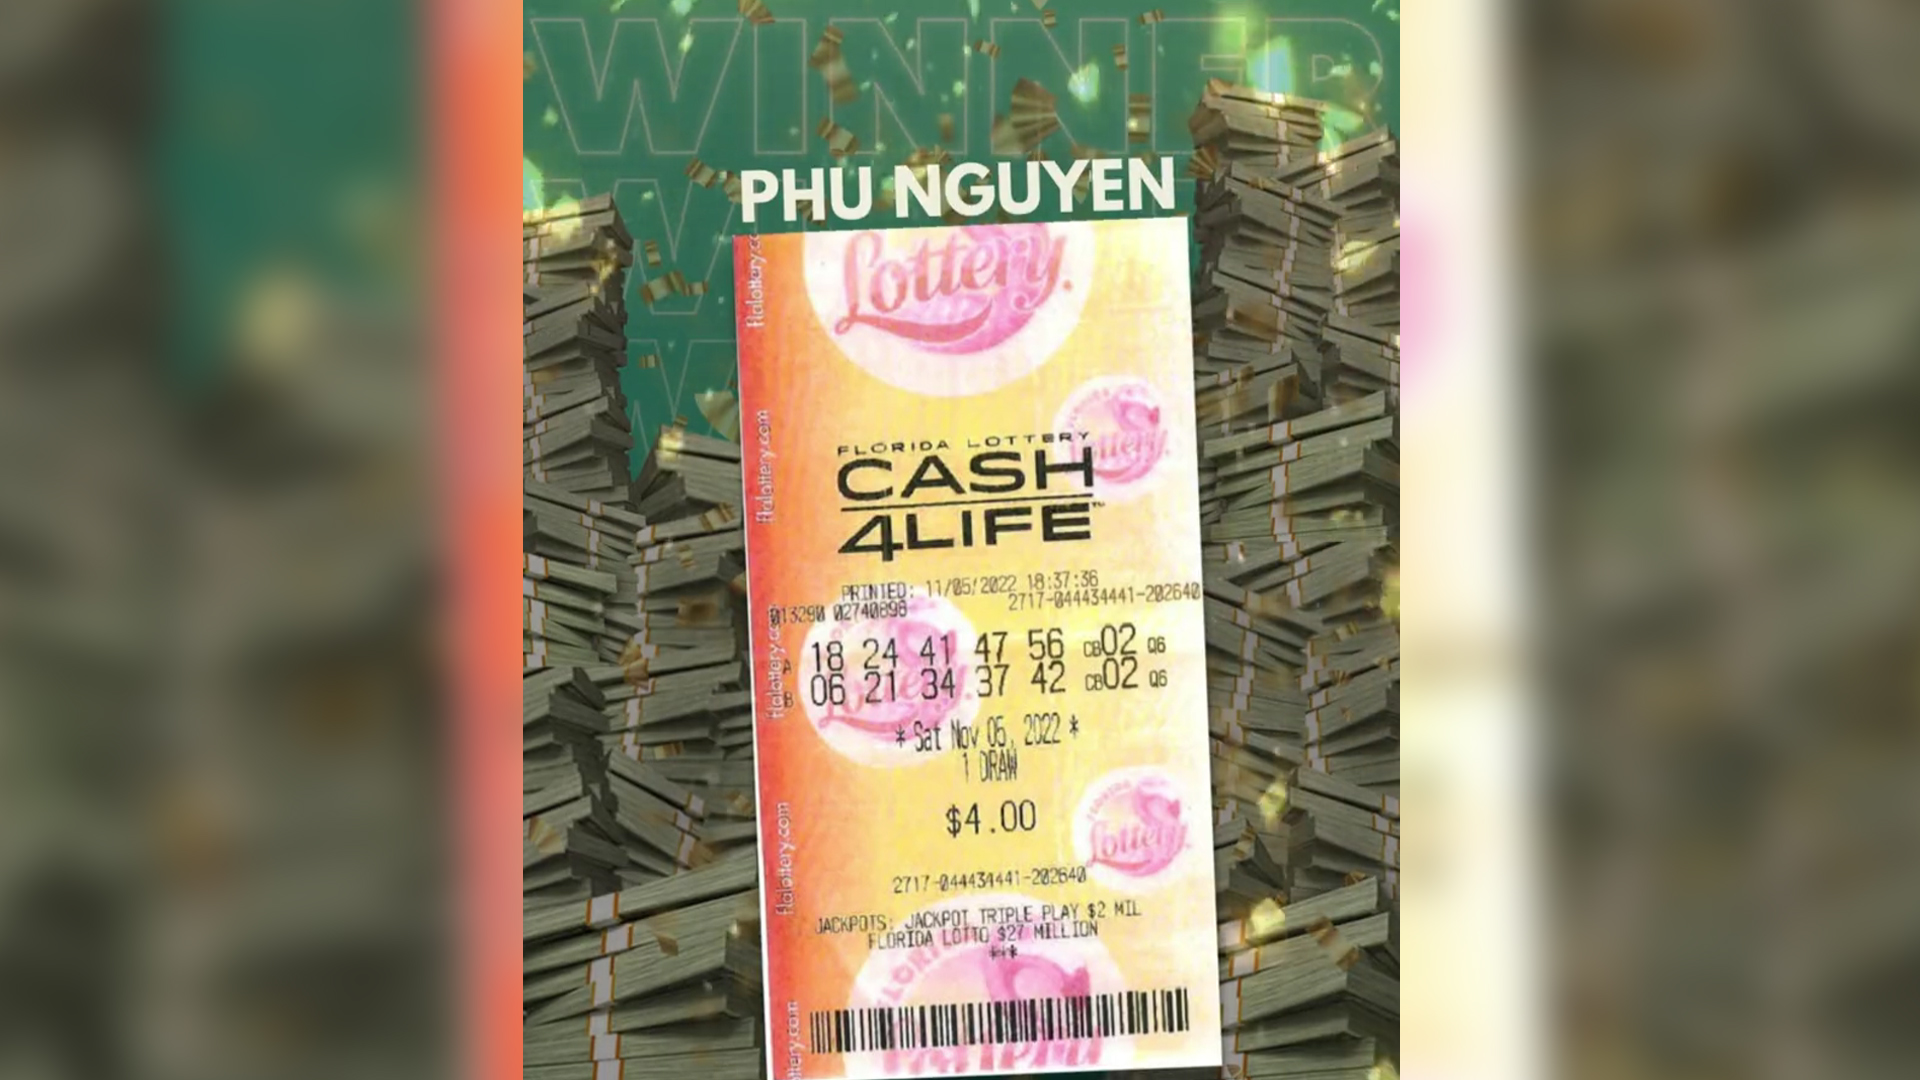 Florida man wins $1K a week for life off Publix lottery ticket